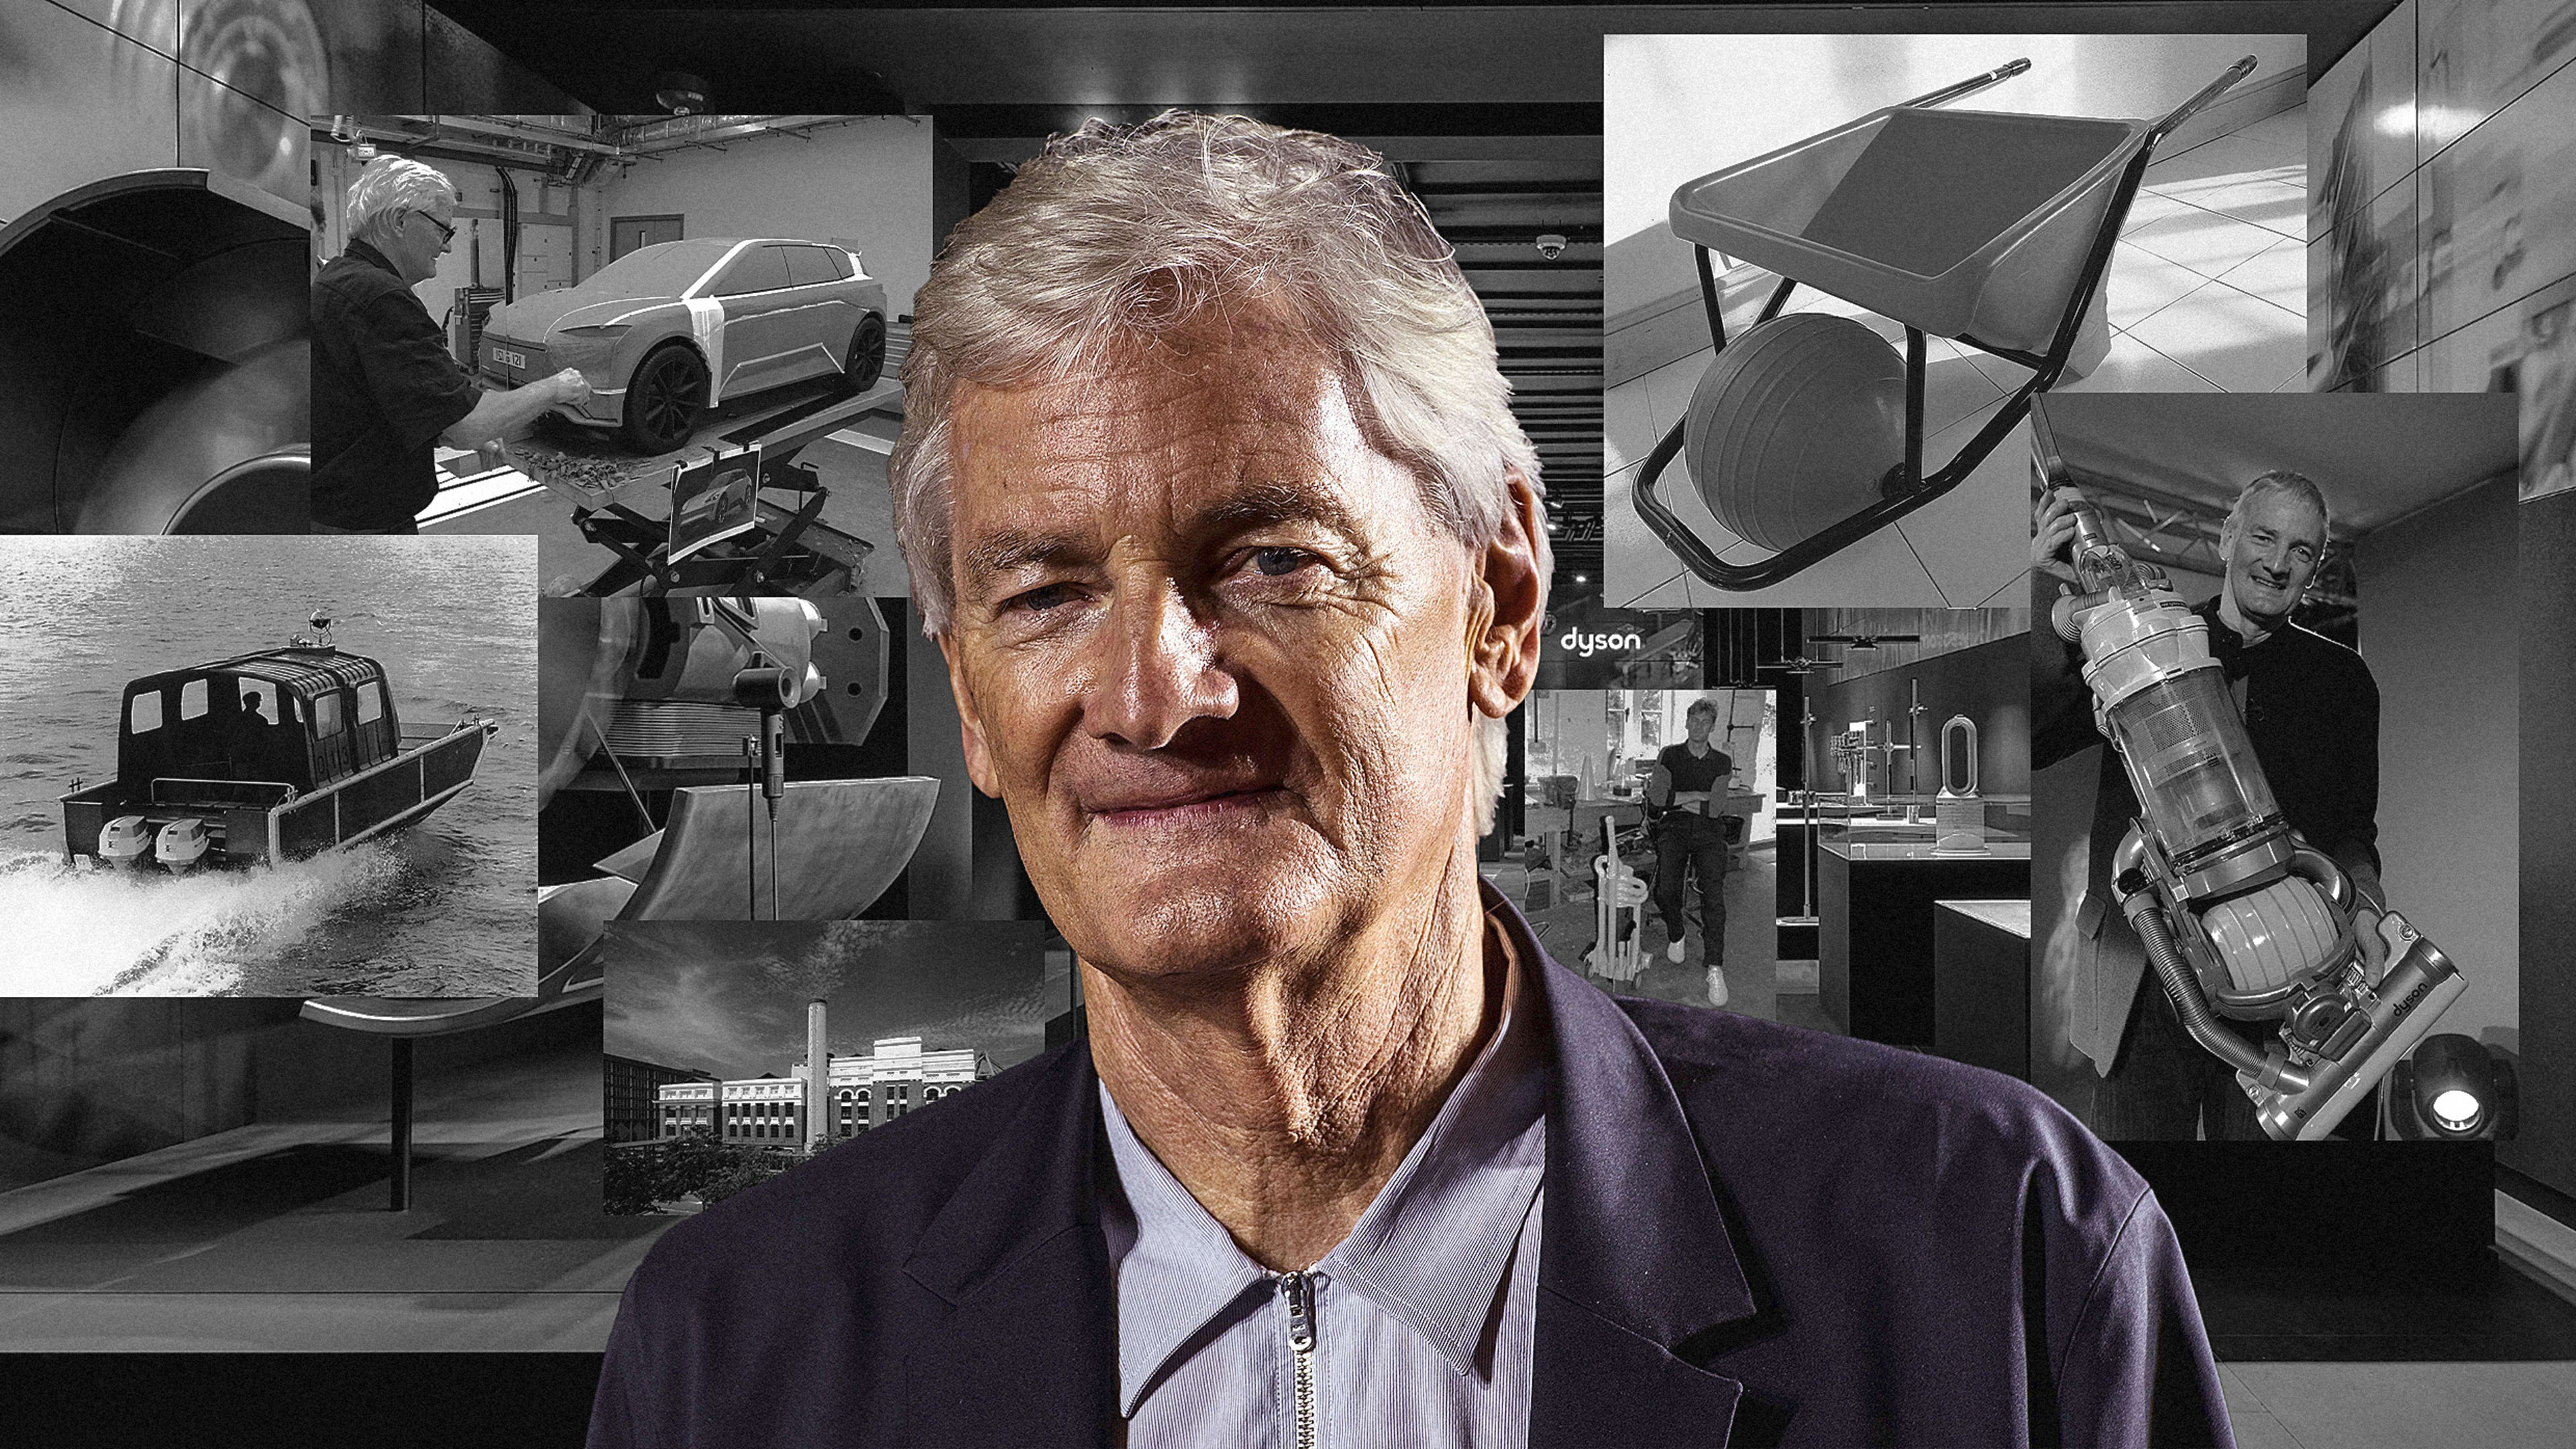 From nearly $1 million in debt to a household name: James Dyson dishes on his biggest hits and misses